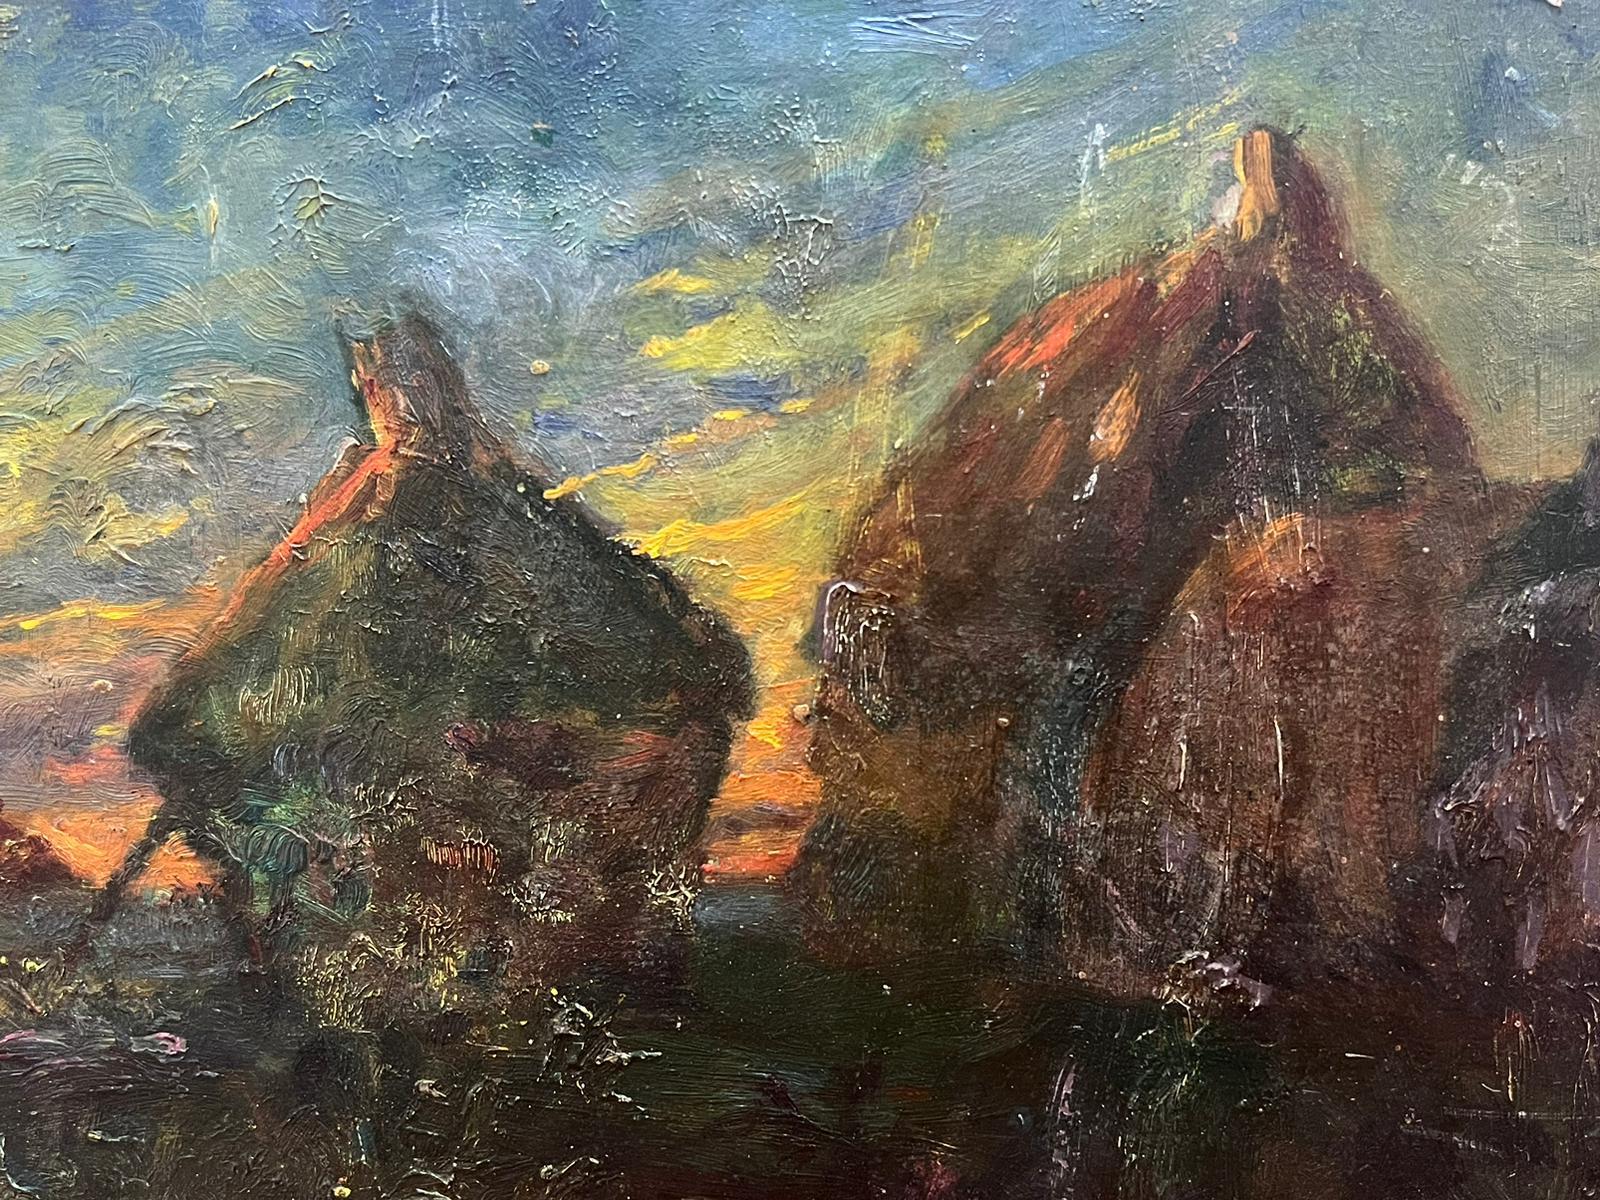 Haystacks at Sunset
French Impressionist artist, early 20th century
oil on board unframed
board: 7.5 x 10.5 inches
provenance: private collection, France
condition: sound condition but with several scuffs to the surface